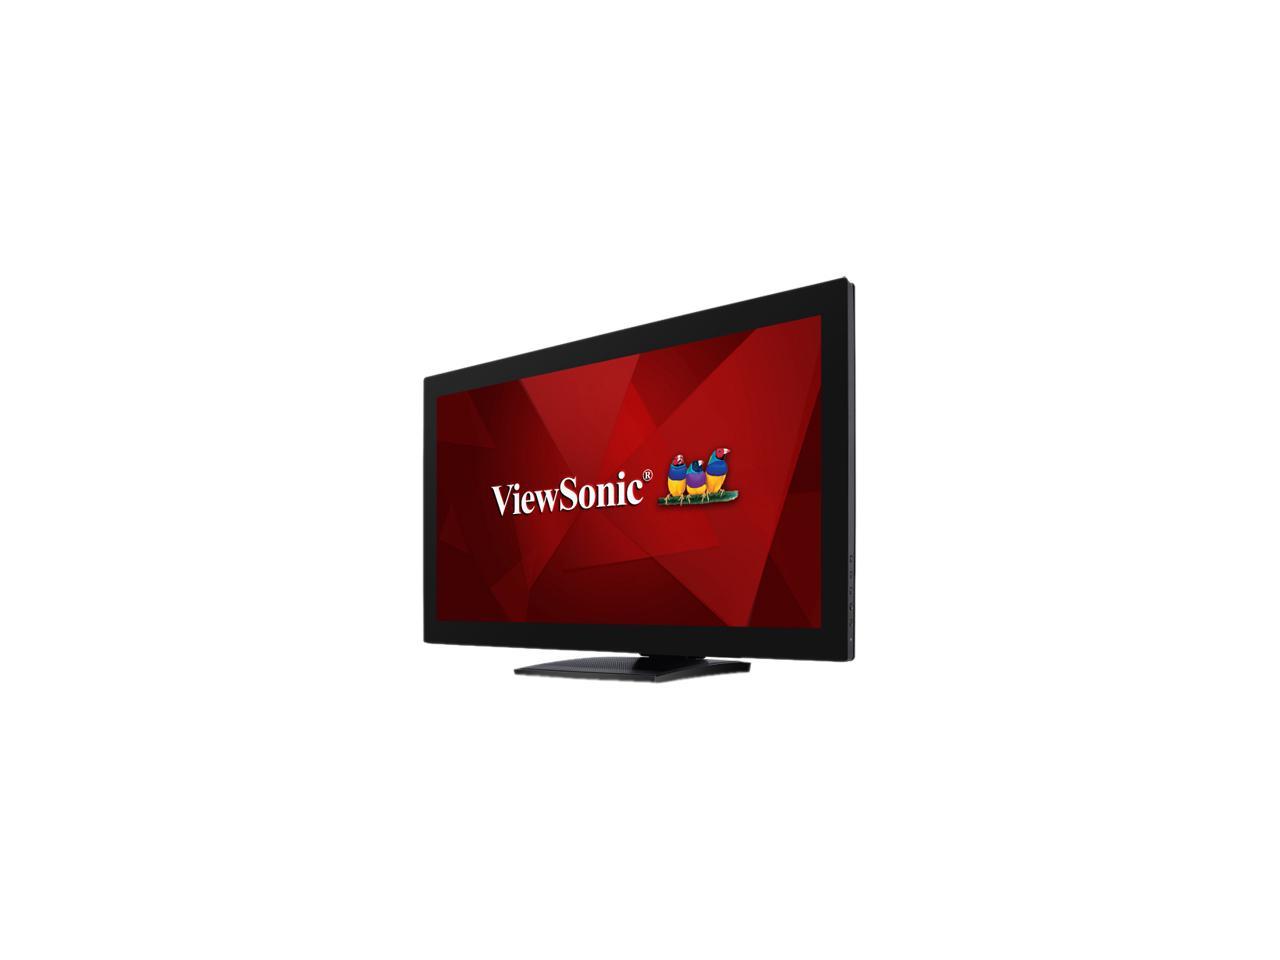 ViewSonic TD2760 Black 27" Full HD 1920x1080 Mega Dynamic Contrast VGA HDMI DisplayPort USB Ports Built-in Speakers 10-Point Multi-Projective Capacitive Touchscreen LED Monitor